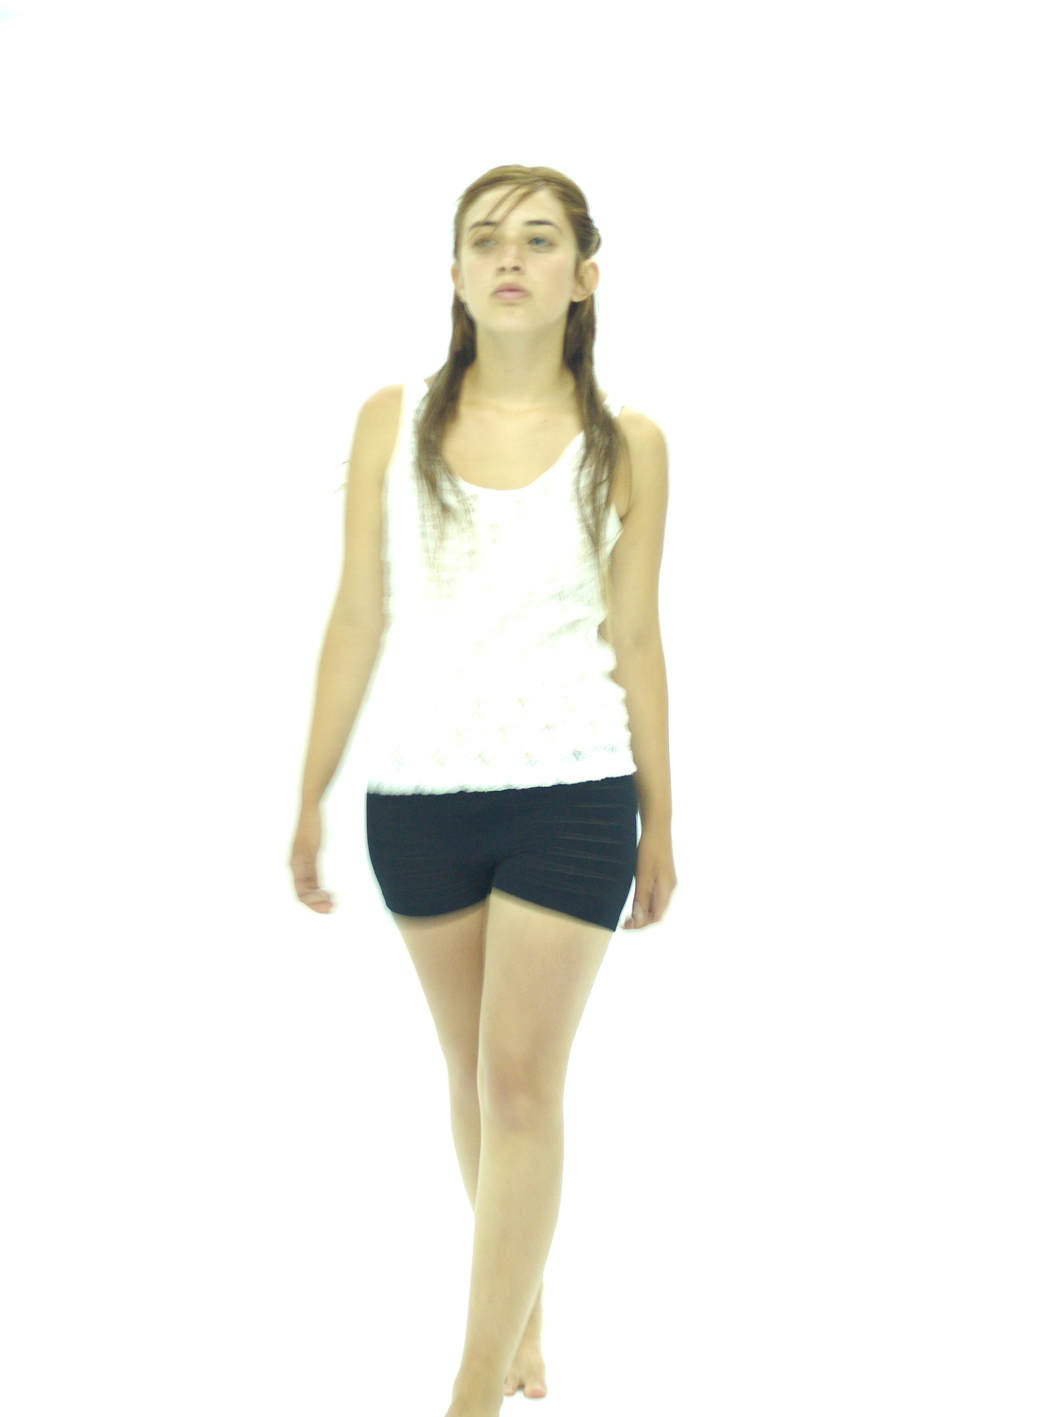 a woman with long hair standing and wearing shorts